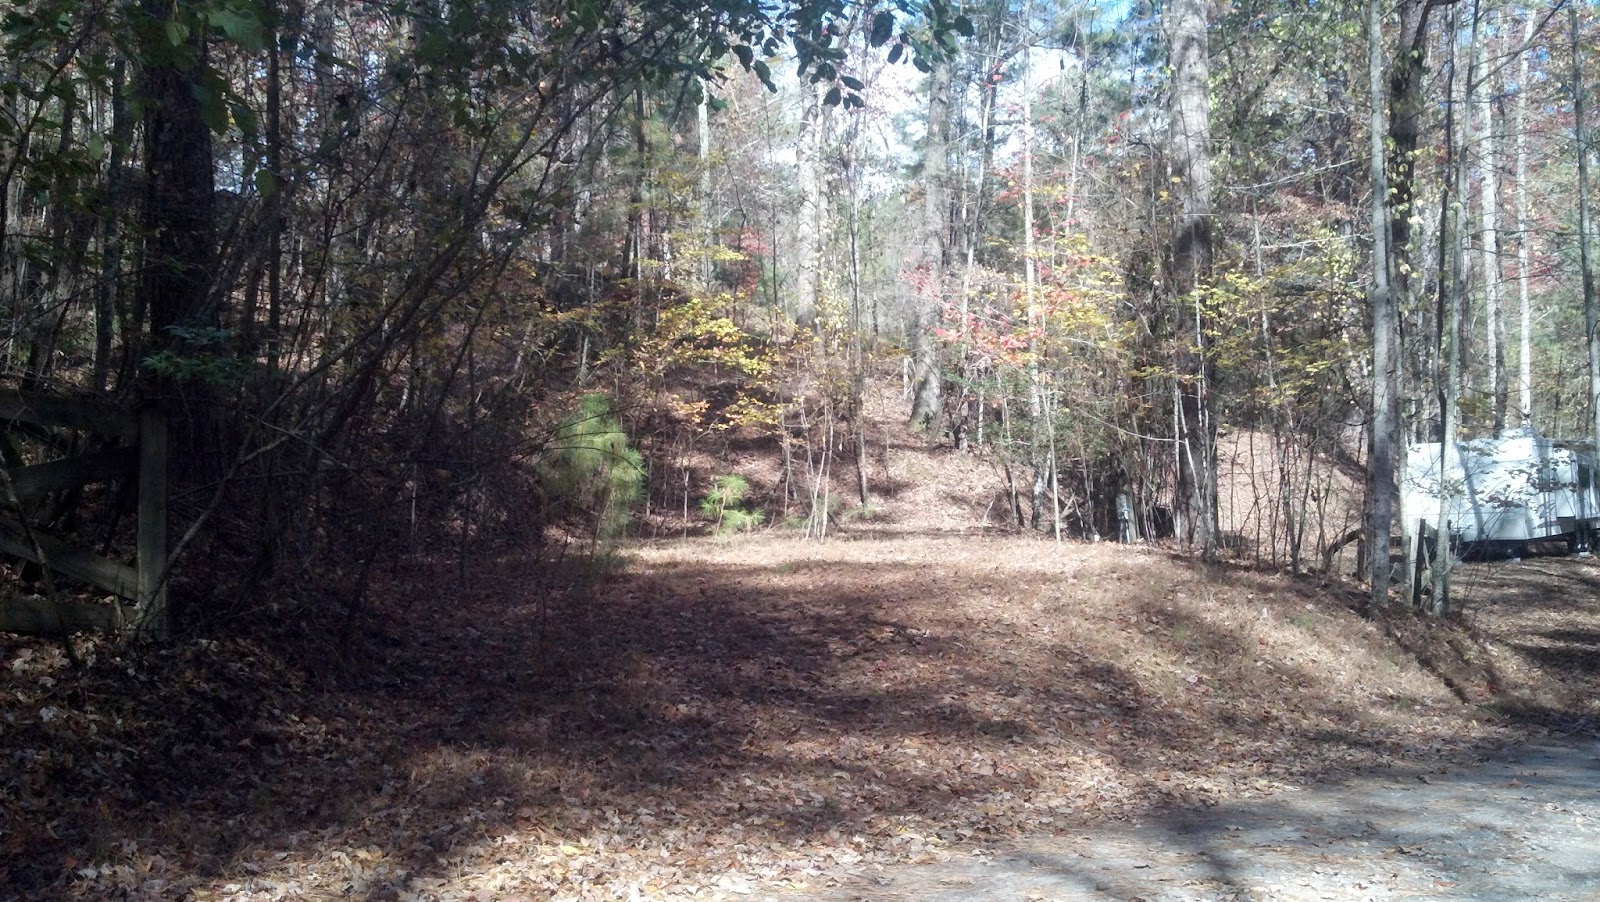  , GA Land for Sale  Residential, Deeded Campground, and RV Lots